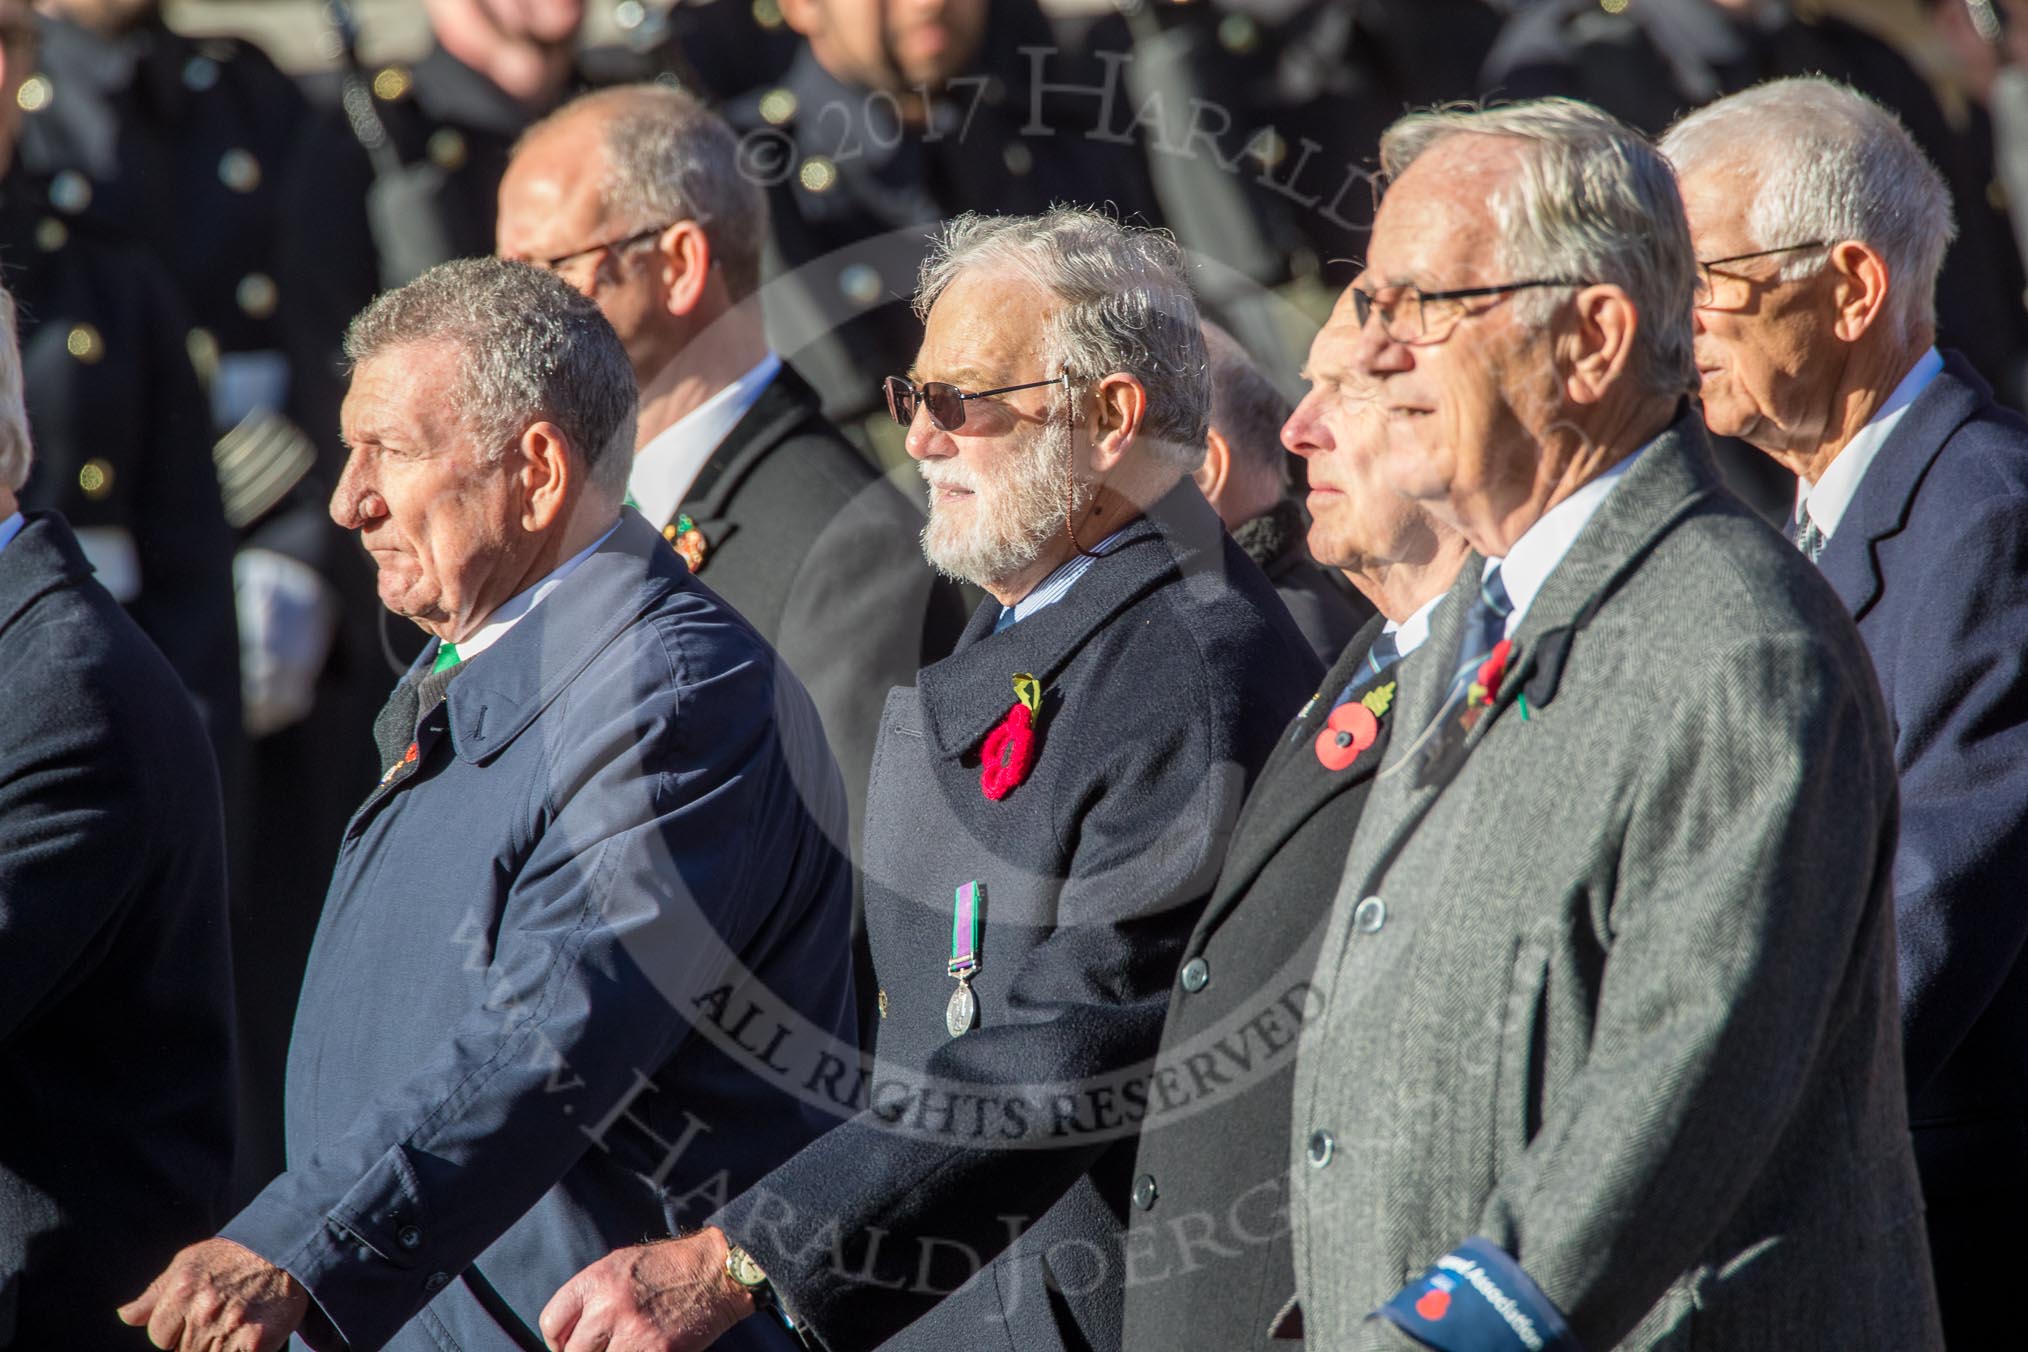 The Fisgard Association  (Group E42, 35 members) during the Royal British Legion March Past on Remembrance Sunday at the Cenotaph, Whitehall, Westminster, London, 11 November 2018, 11:46.